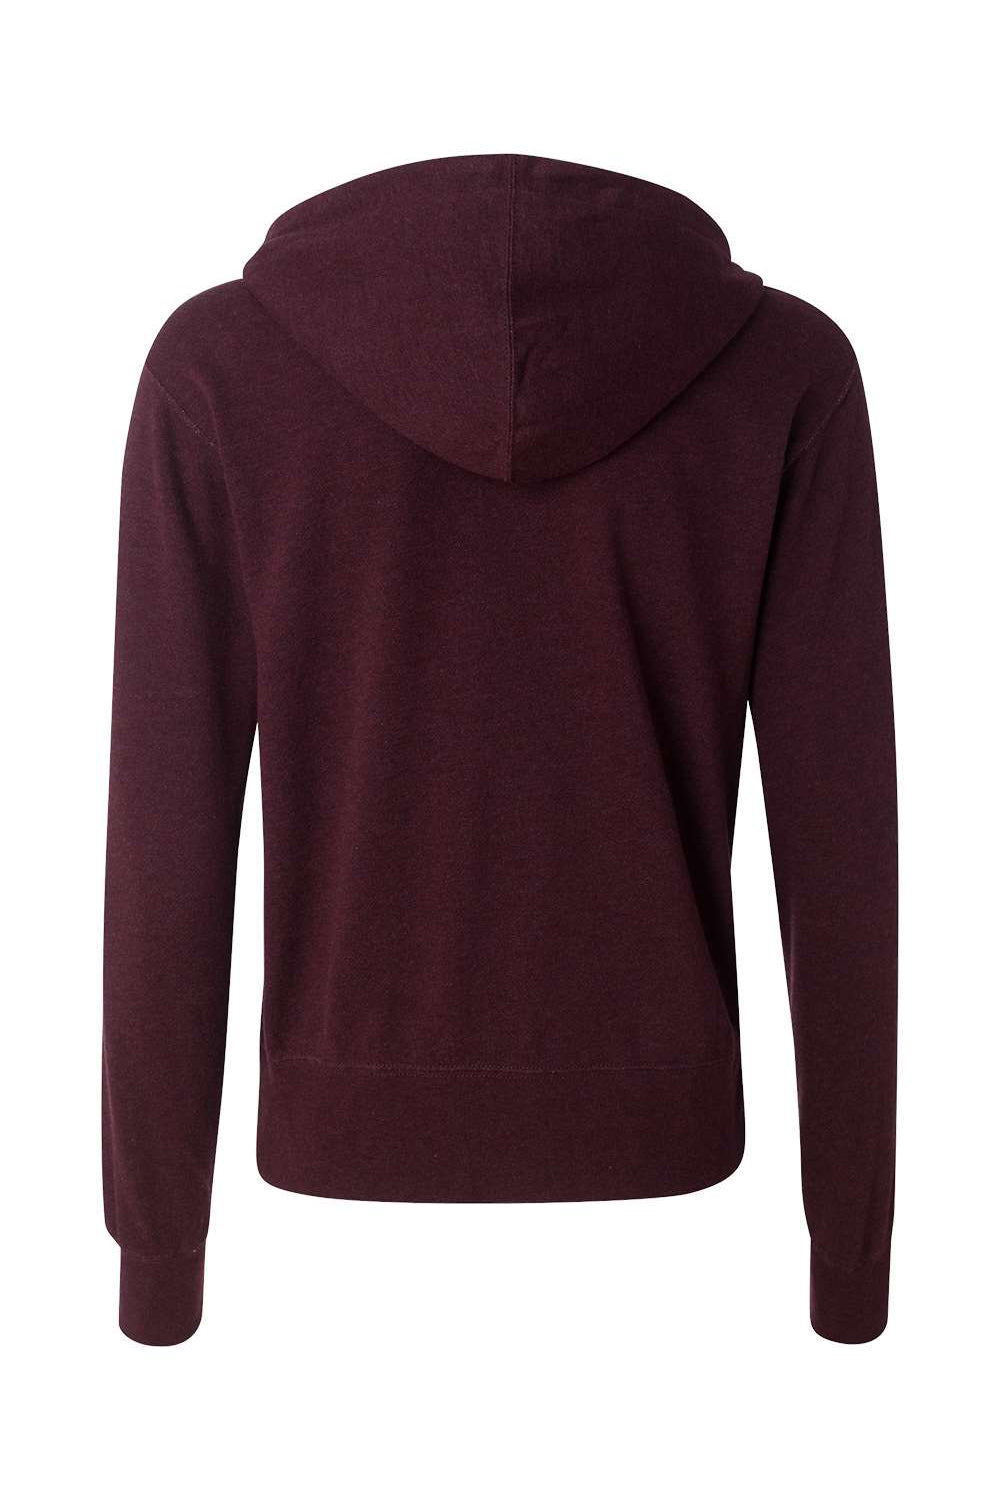 Independent Trading Co. PRM90HTZ Mens French Terry Full Zip Hooded Sweatshirt Hoodie Heather Burgundy Flat Back